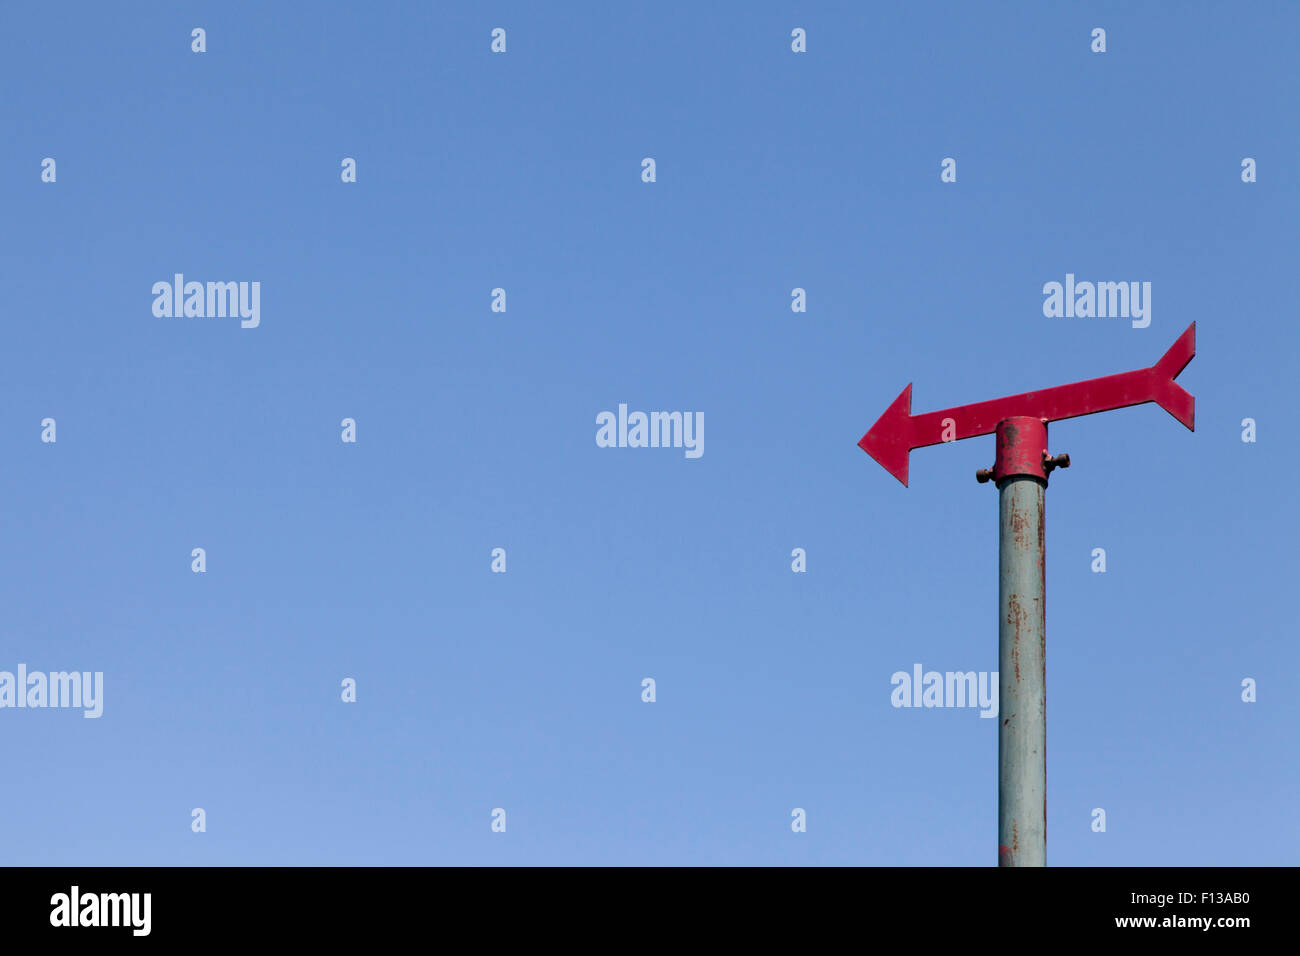 Red signpost against clear blue sky Stock Photo